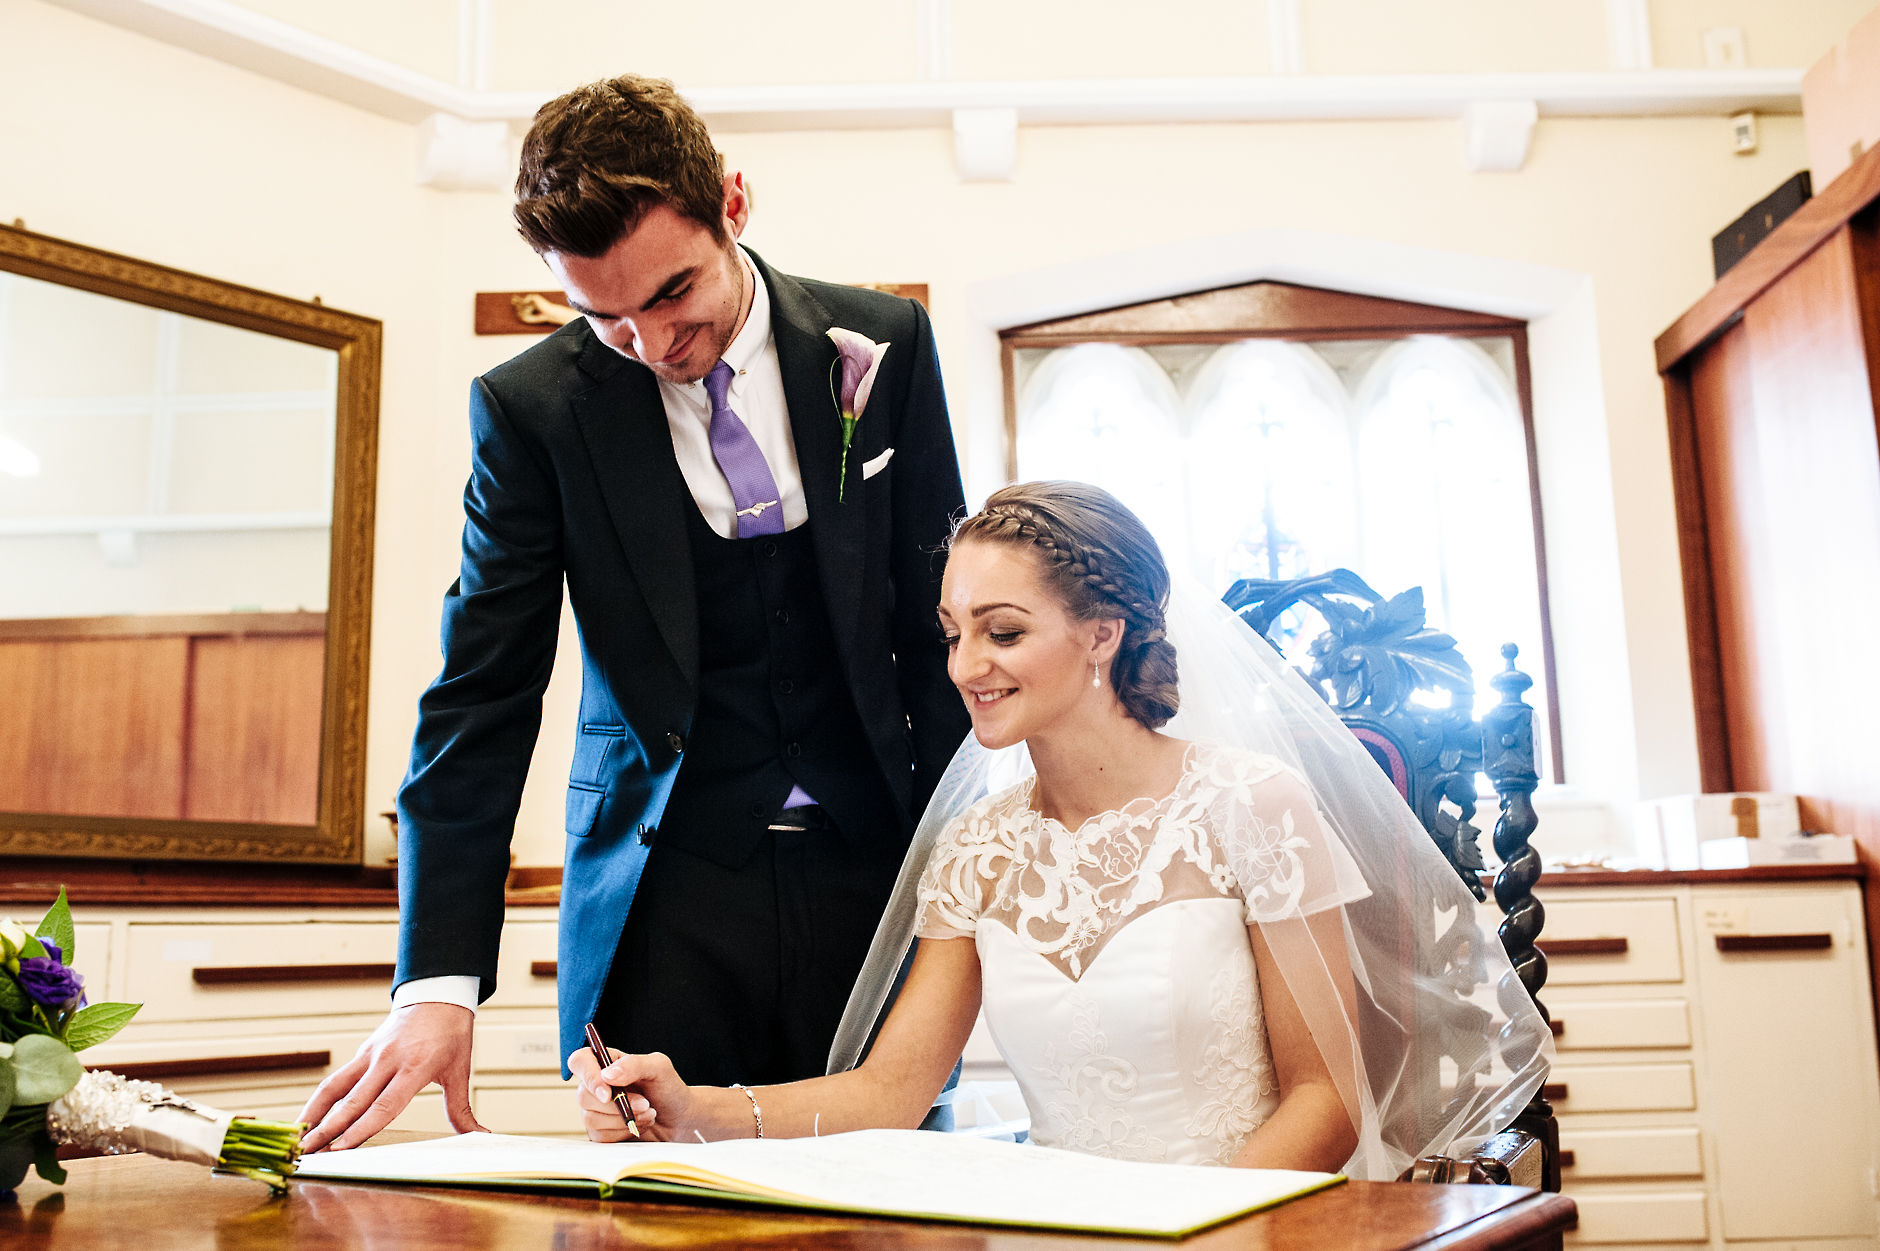 Signing the marriage register